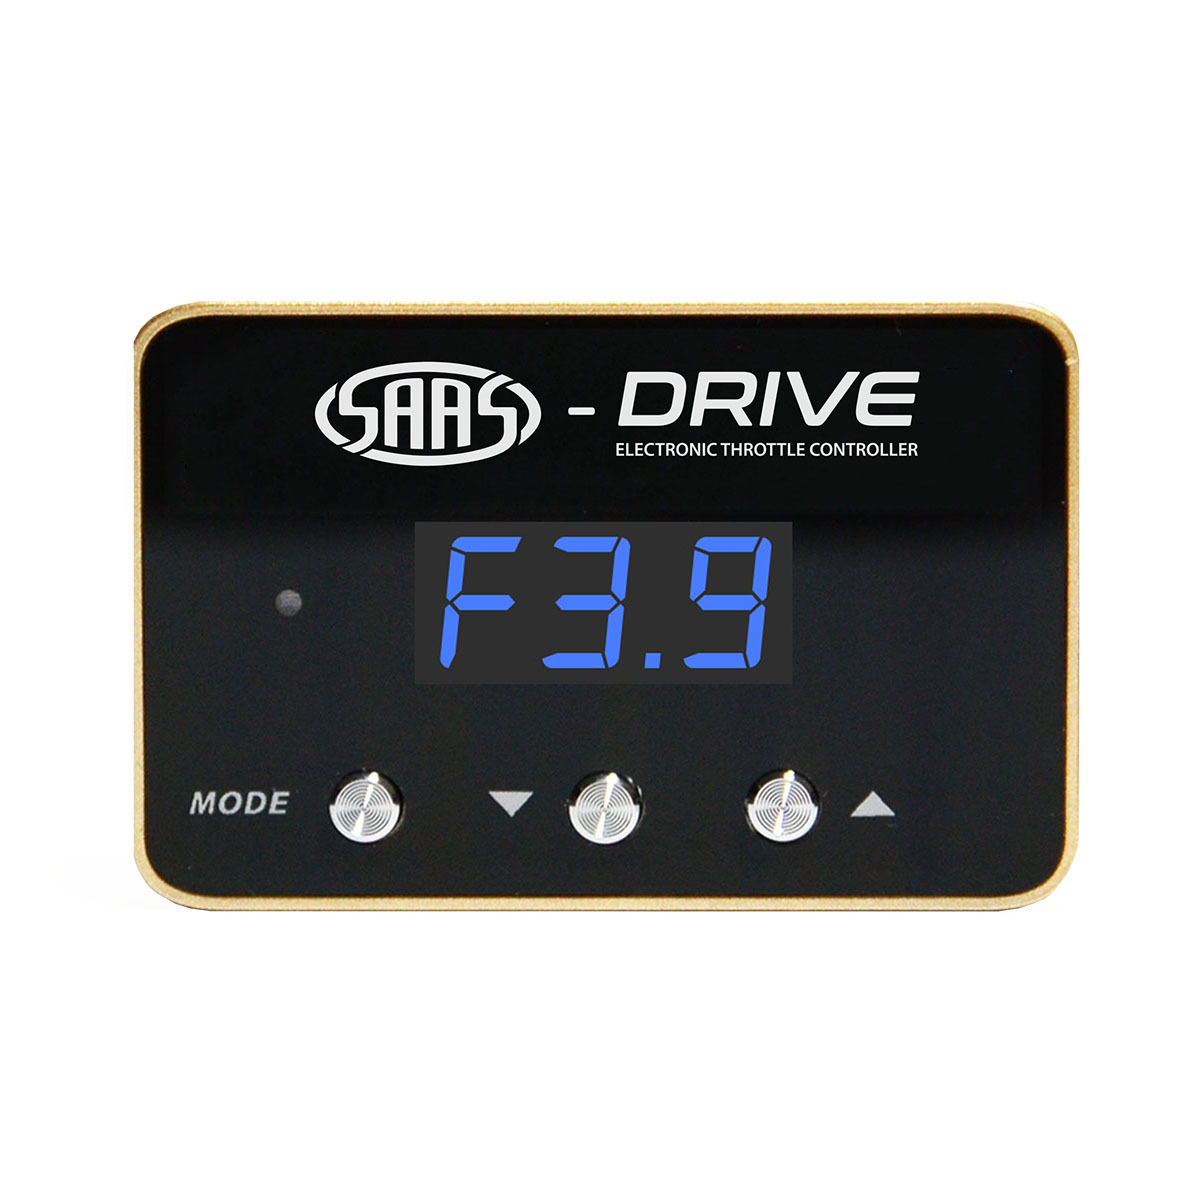 SAAS-Drive Chev Avalanche 2007 - 2013 Throttle Controller